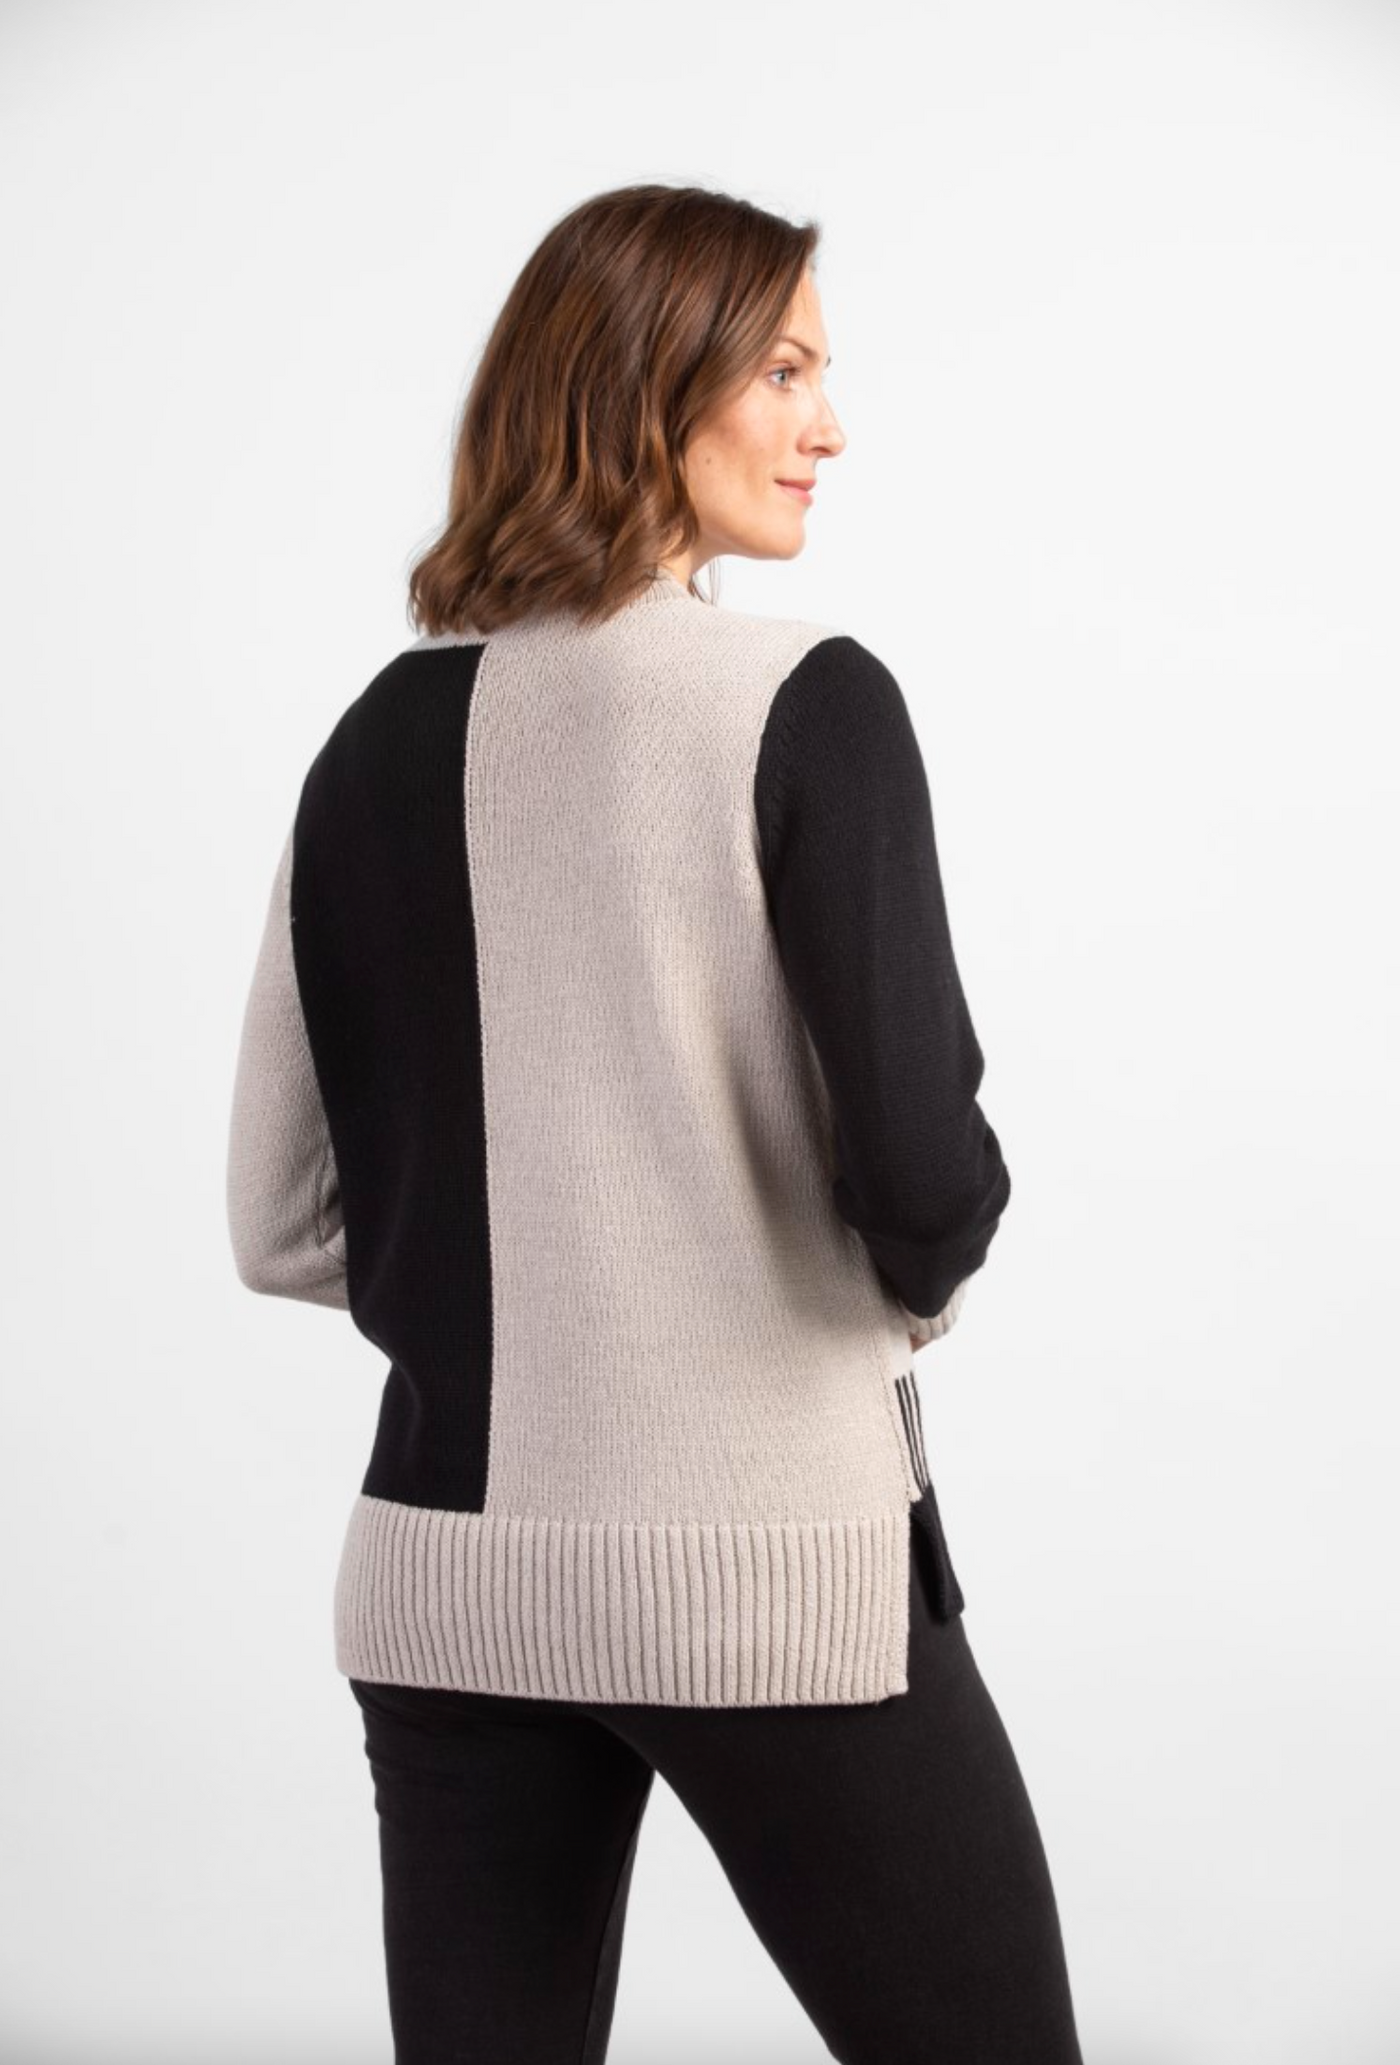 Yin Yang Pullover Sweater, Putty